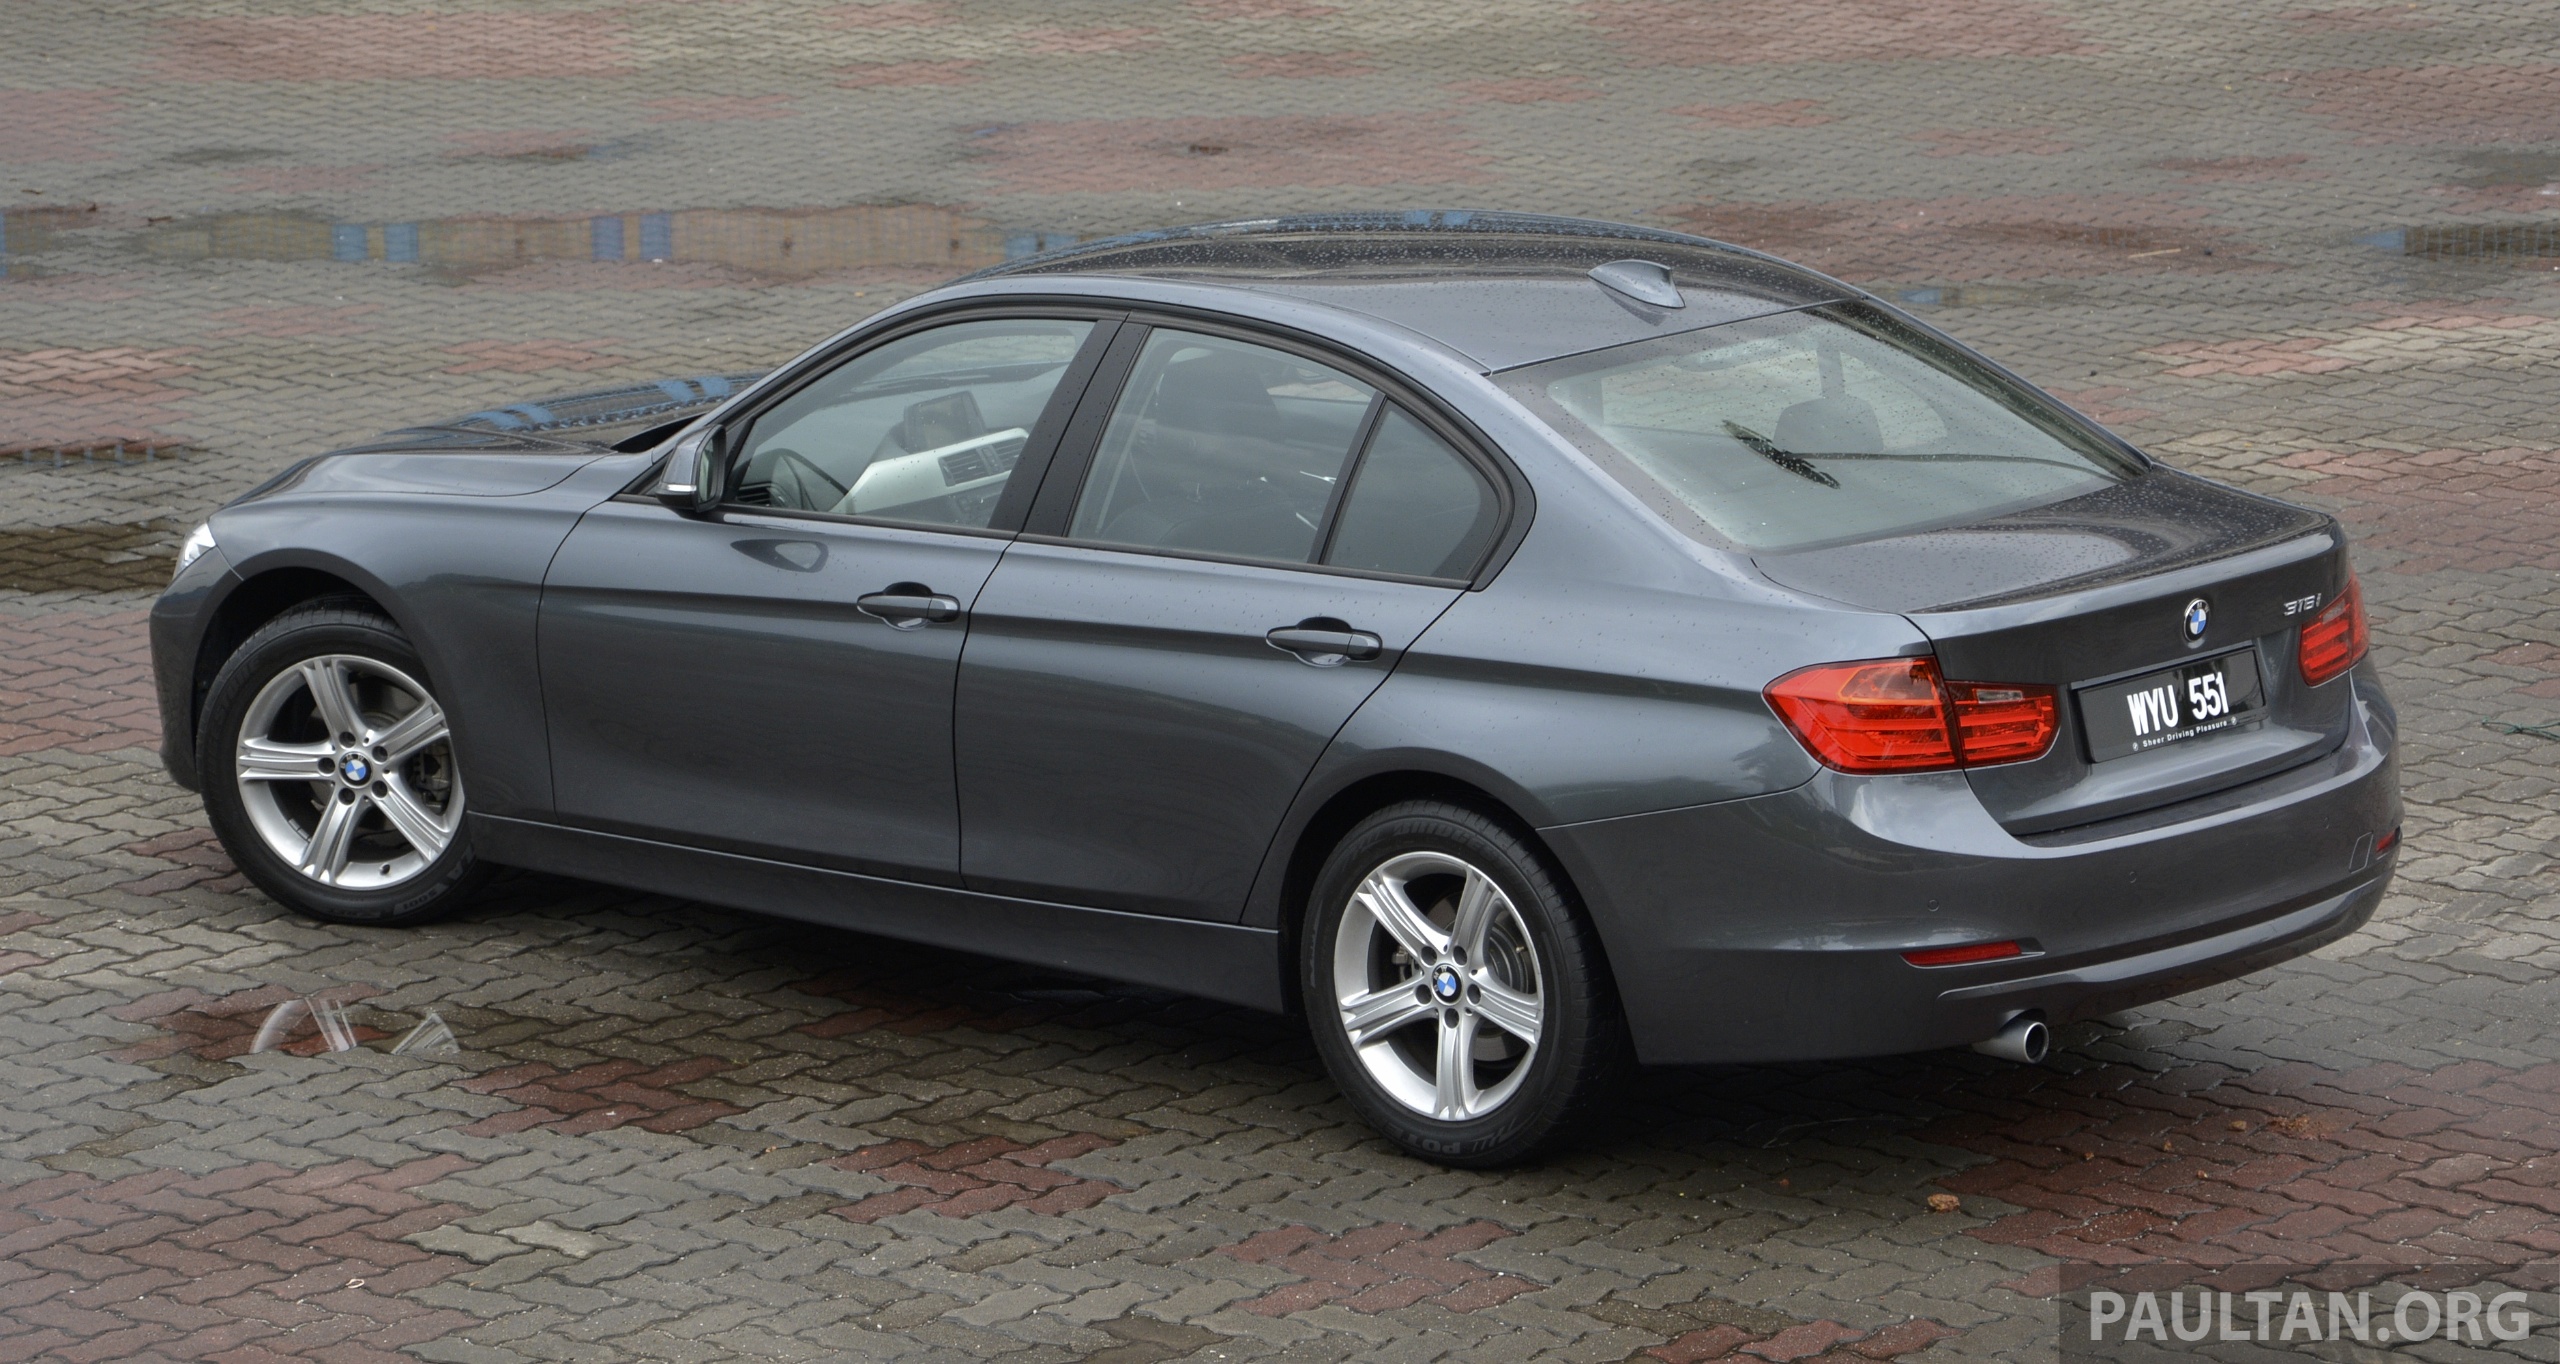 The new bmw 316i 2013 #2